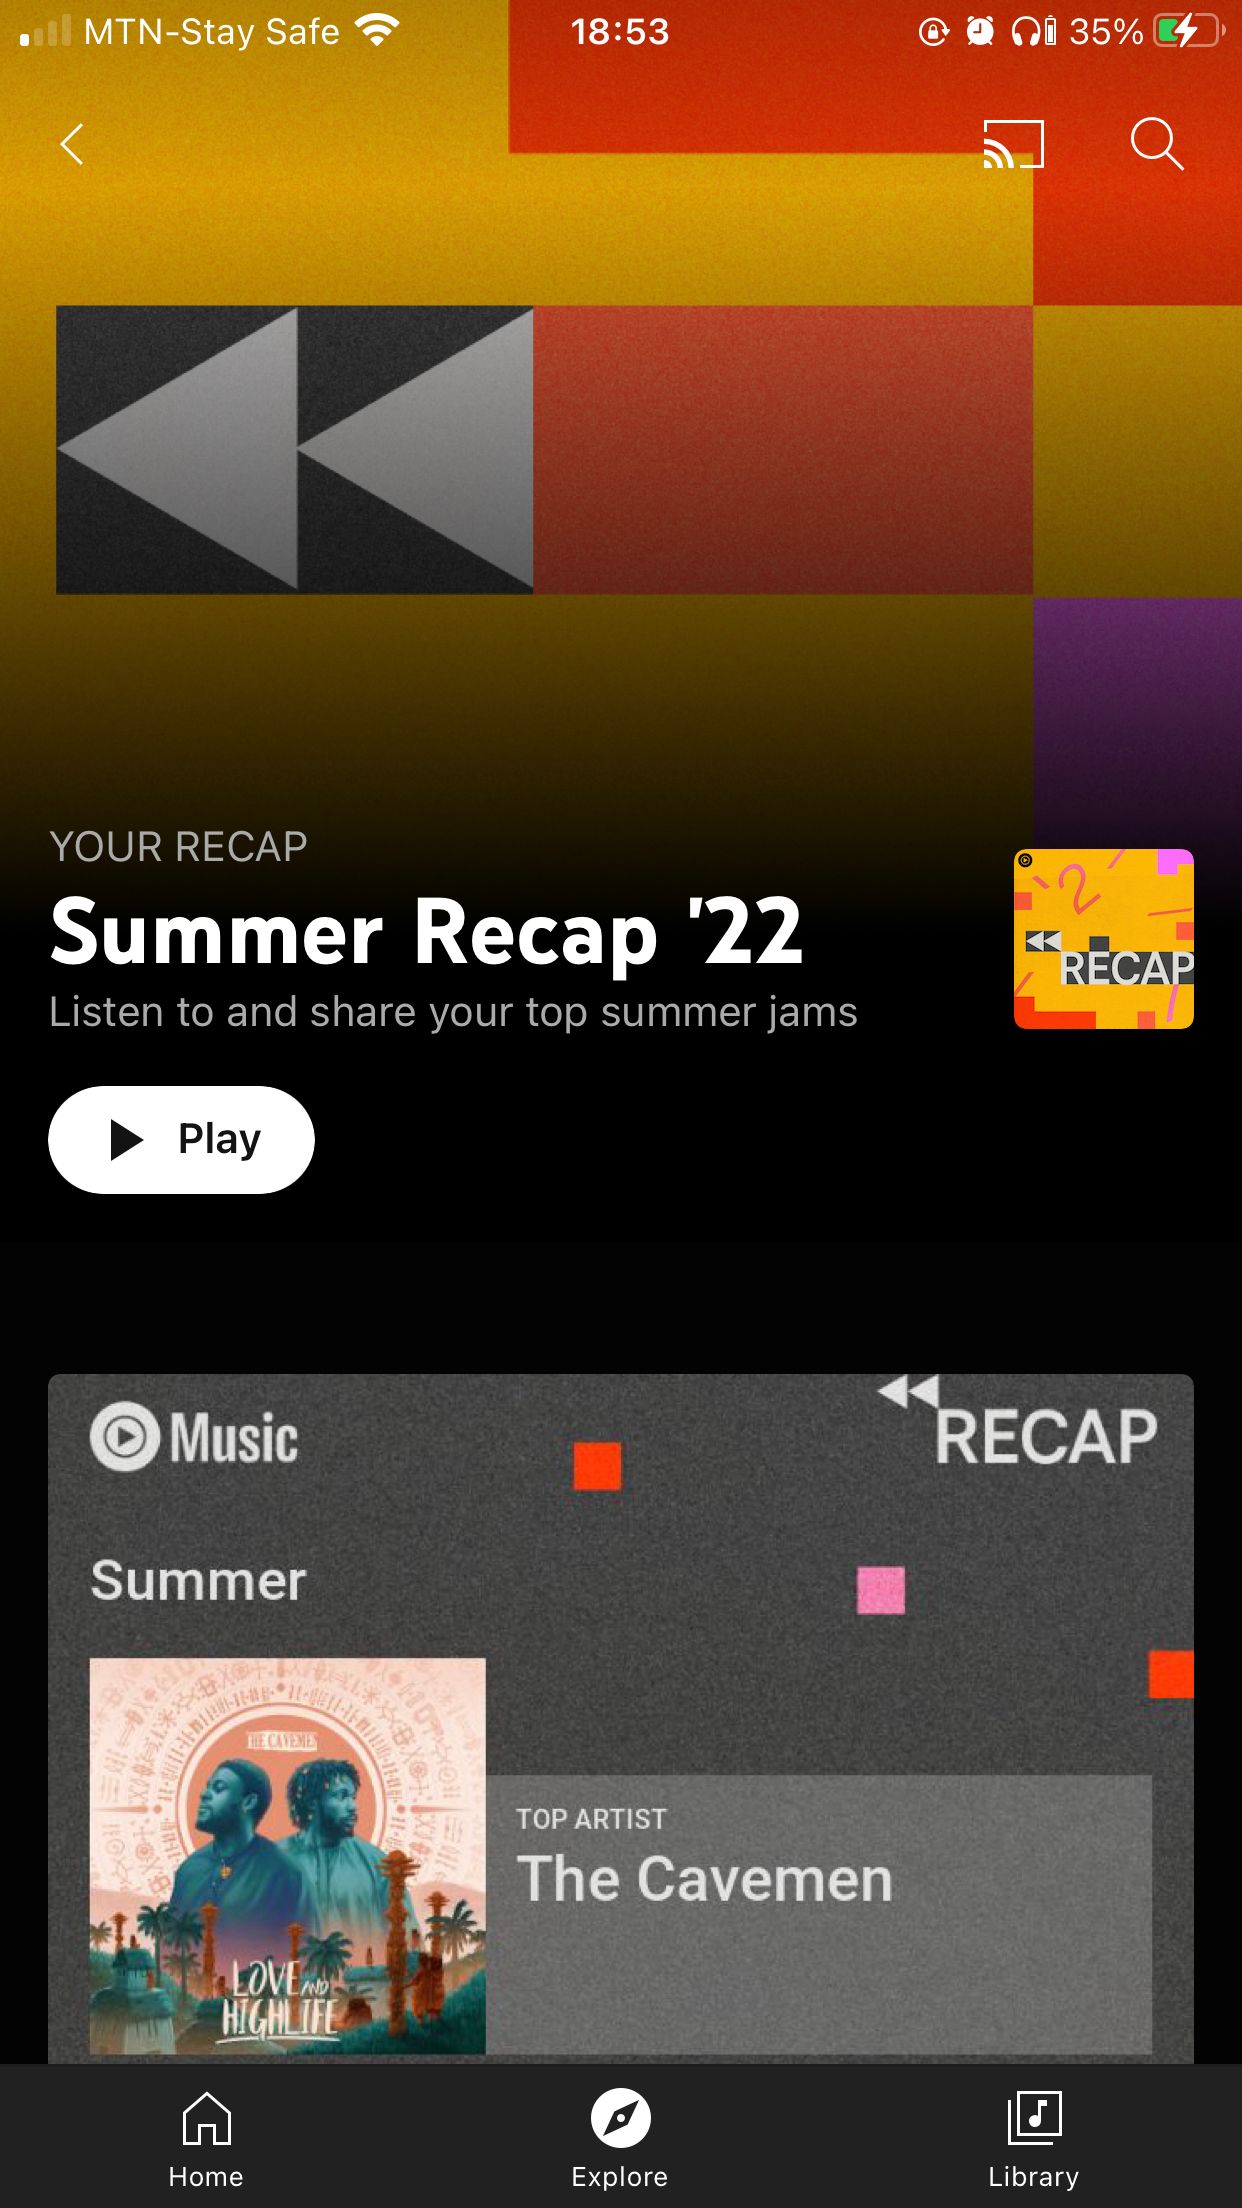 How to See Your Seasonal Recaps on YouTube Music